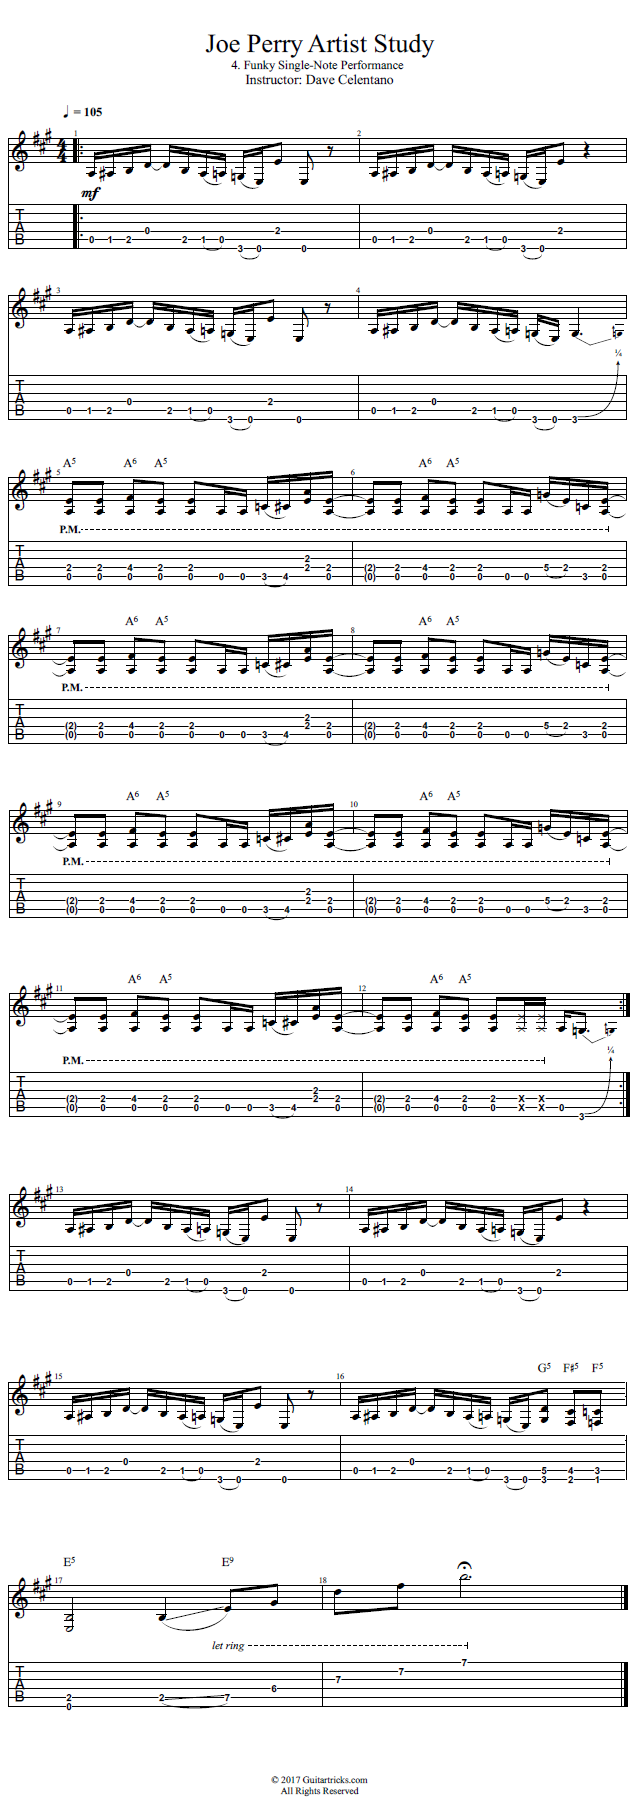 Funky Single-Note Performance song notation